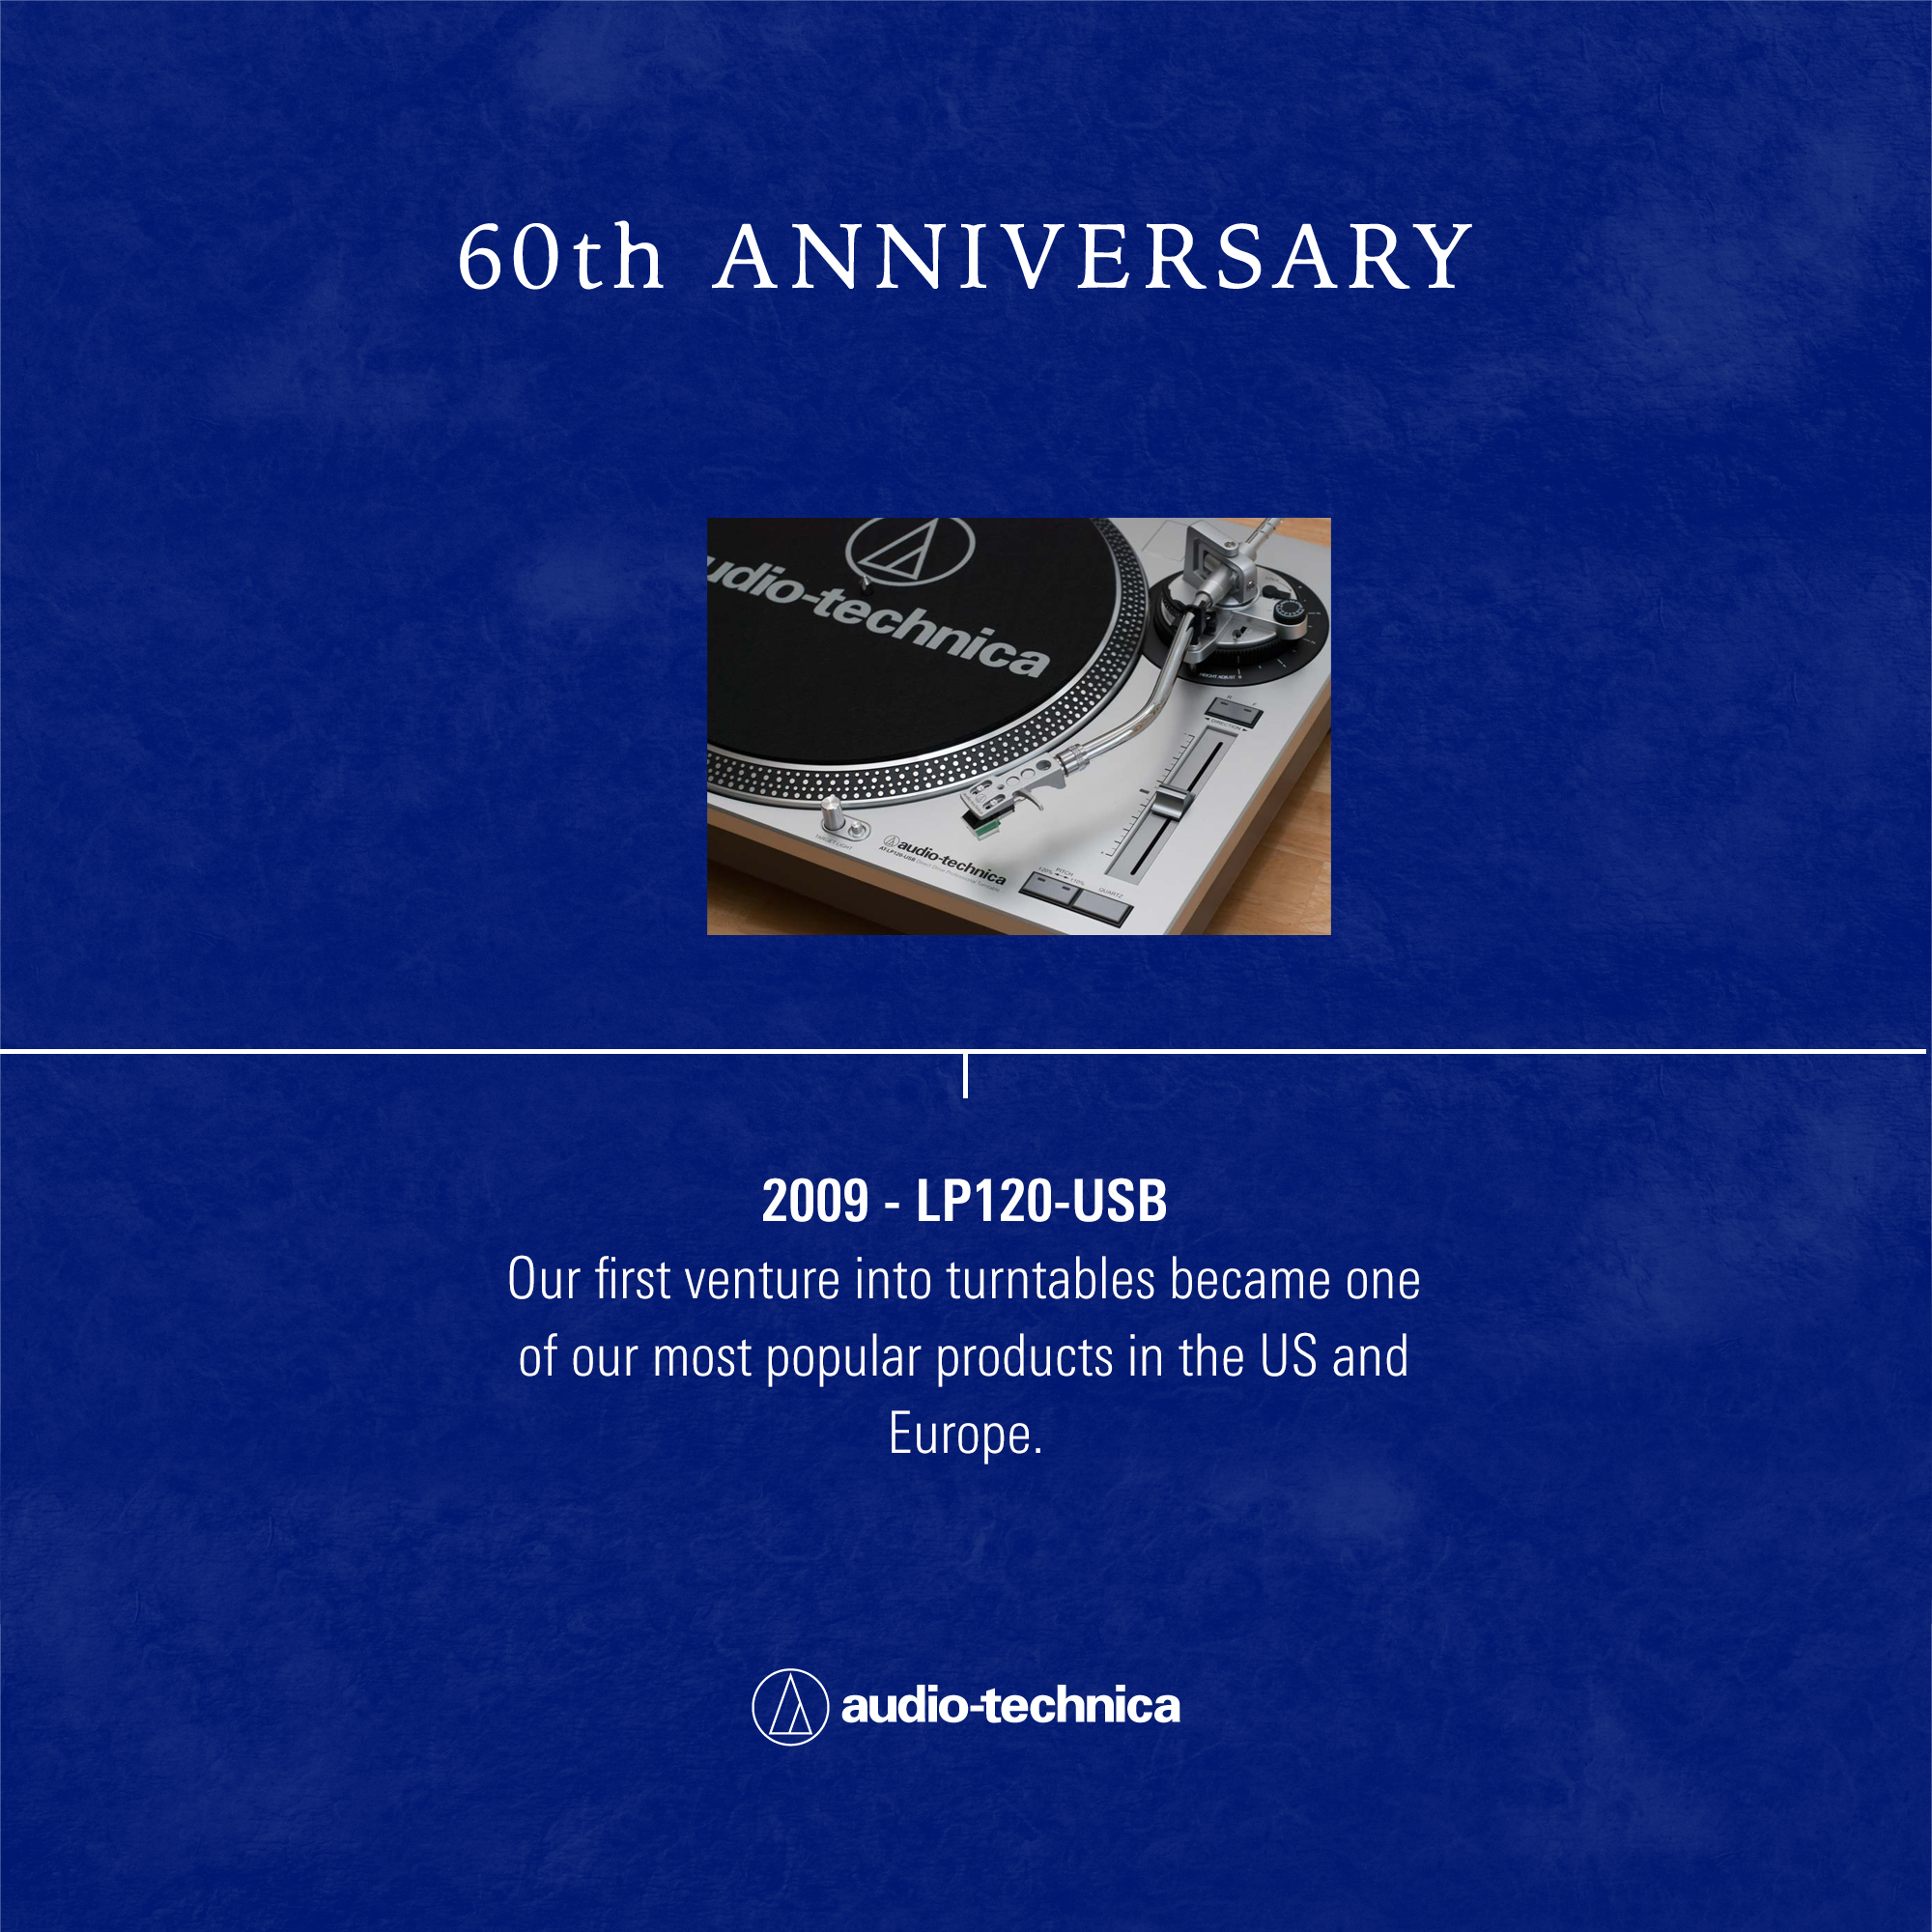 Audio-Technica Celebrates 60 Years of Excellence